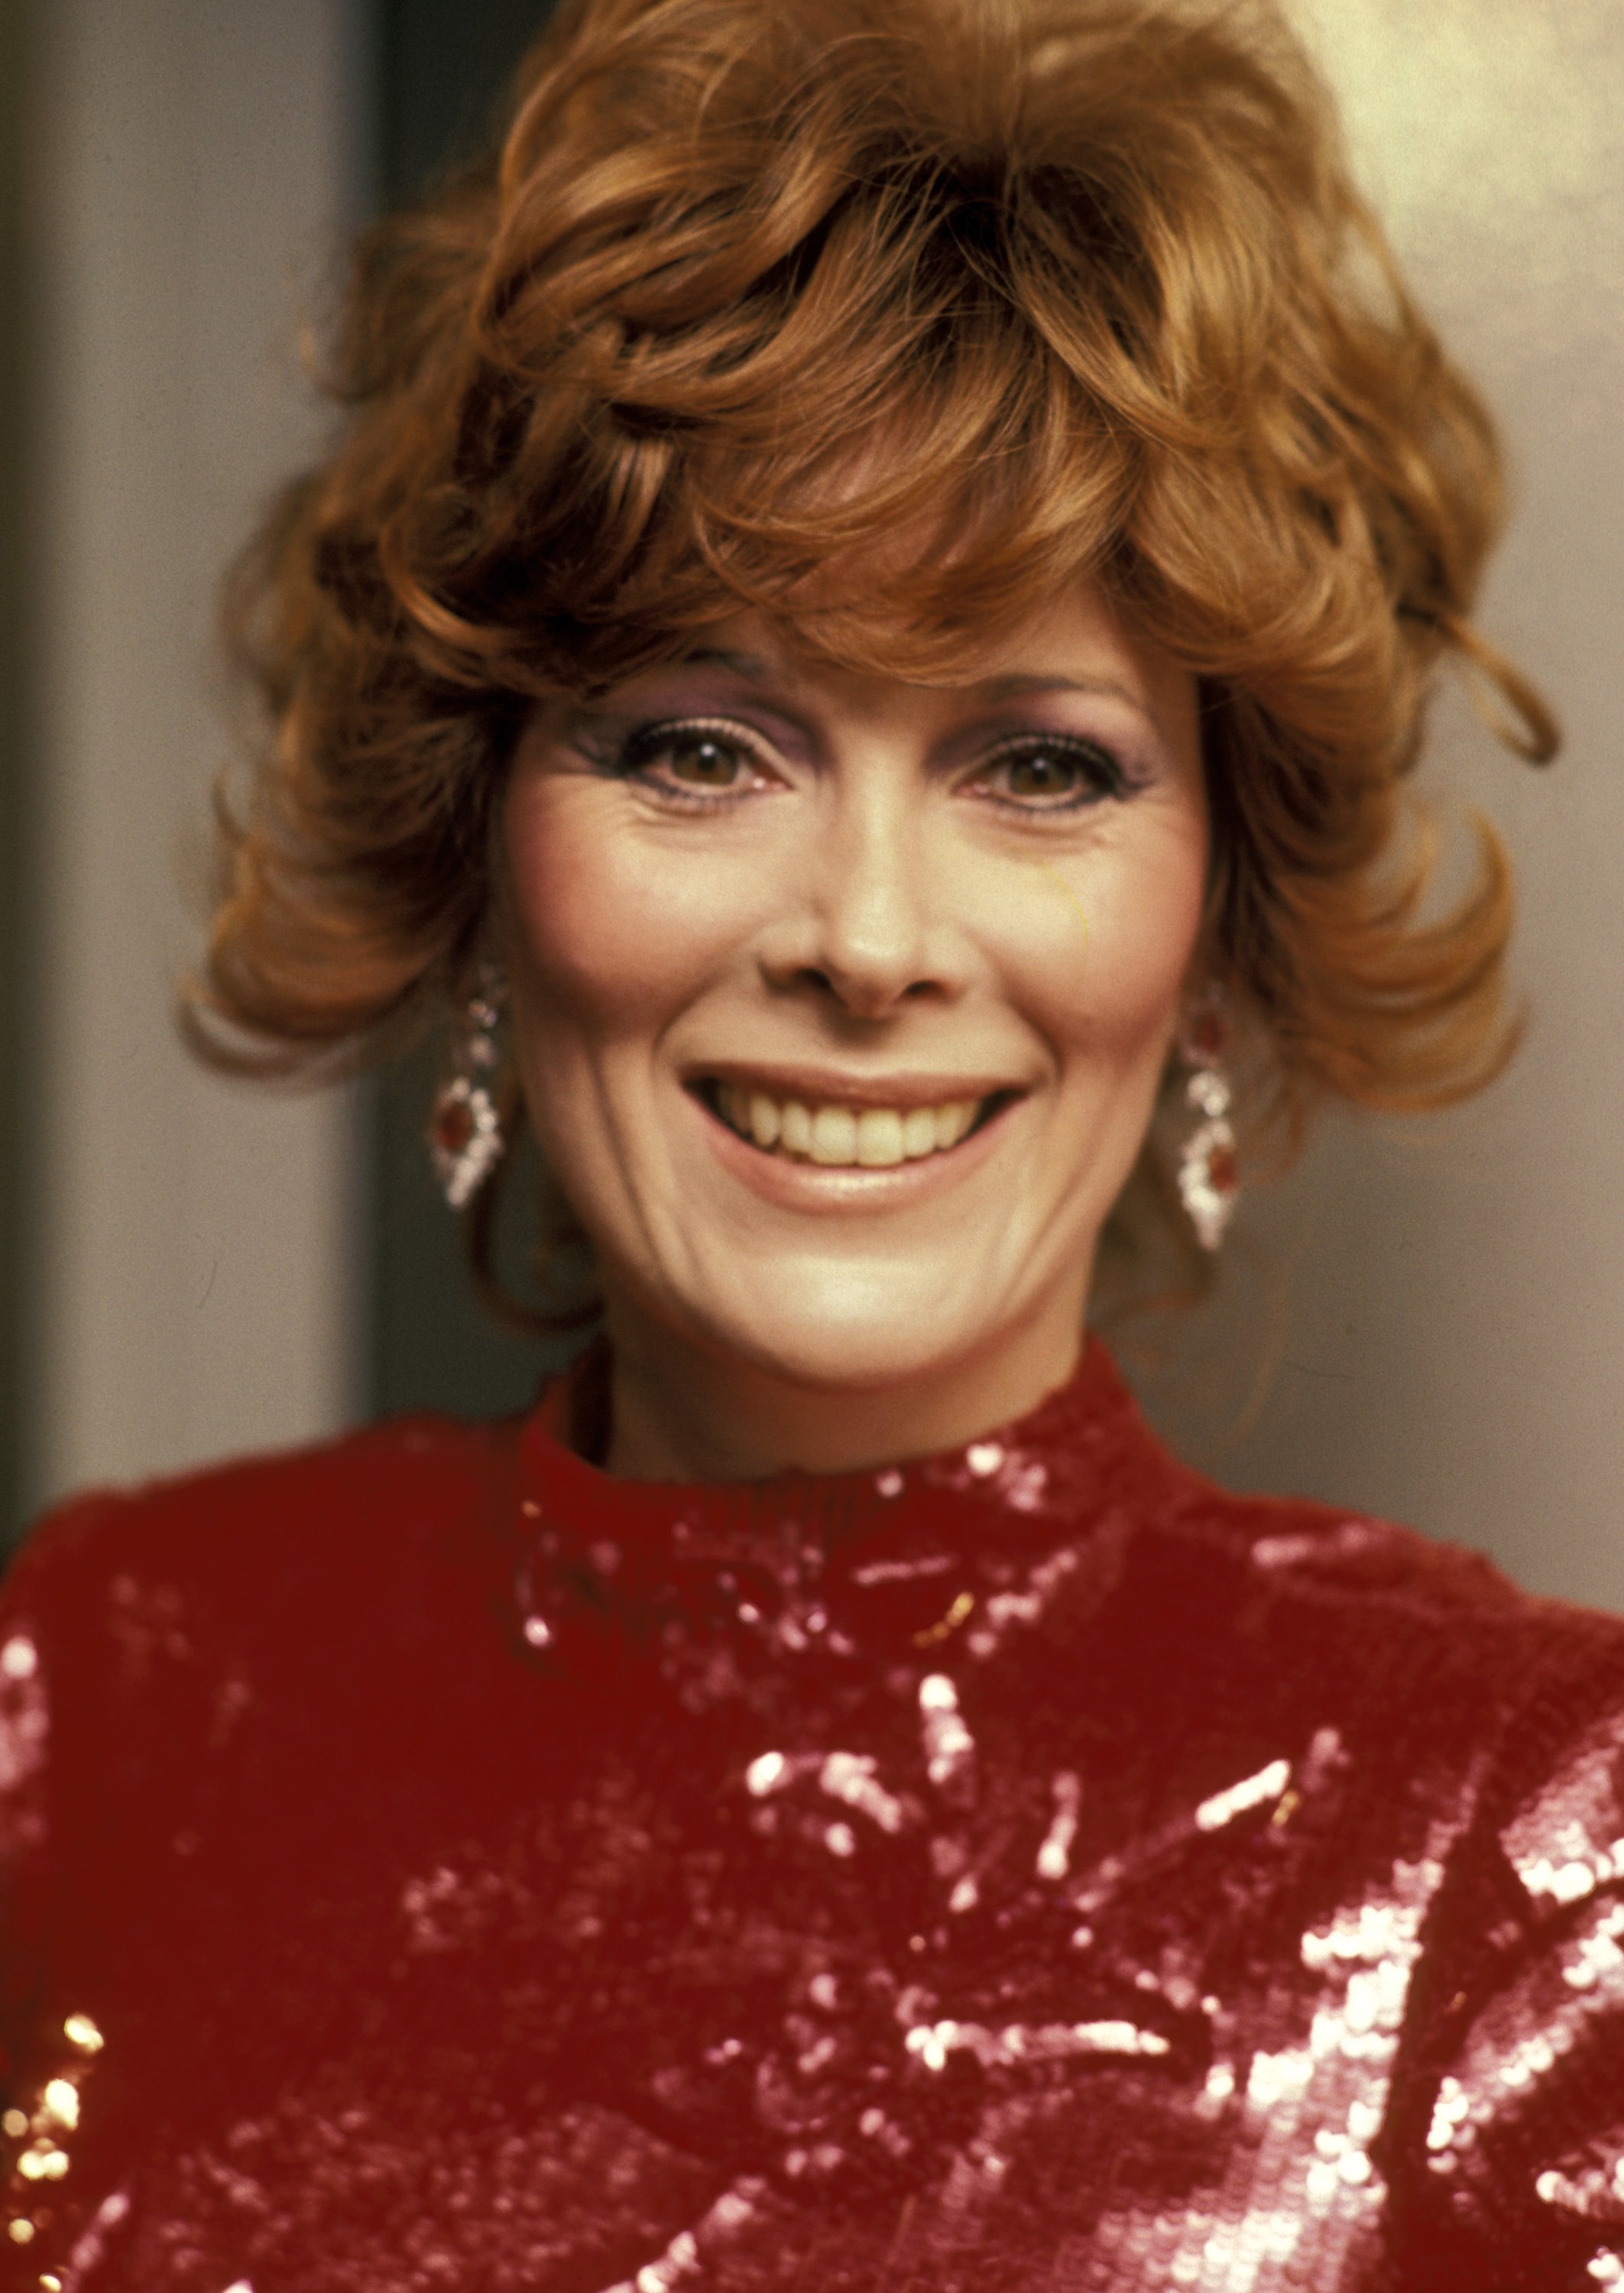 Actress Jill St. John during taping of Bob Hope Special "The Road to Hollywood" at NBC Television Studios on February 20, 1983 in Burbank, California | Source: Getty Images